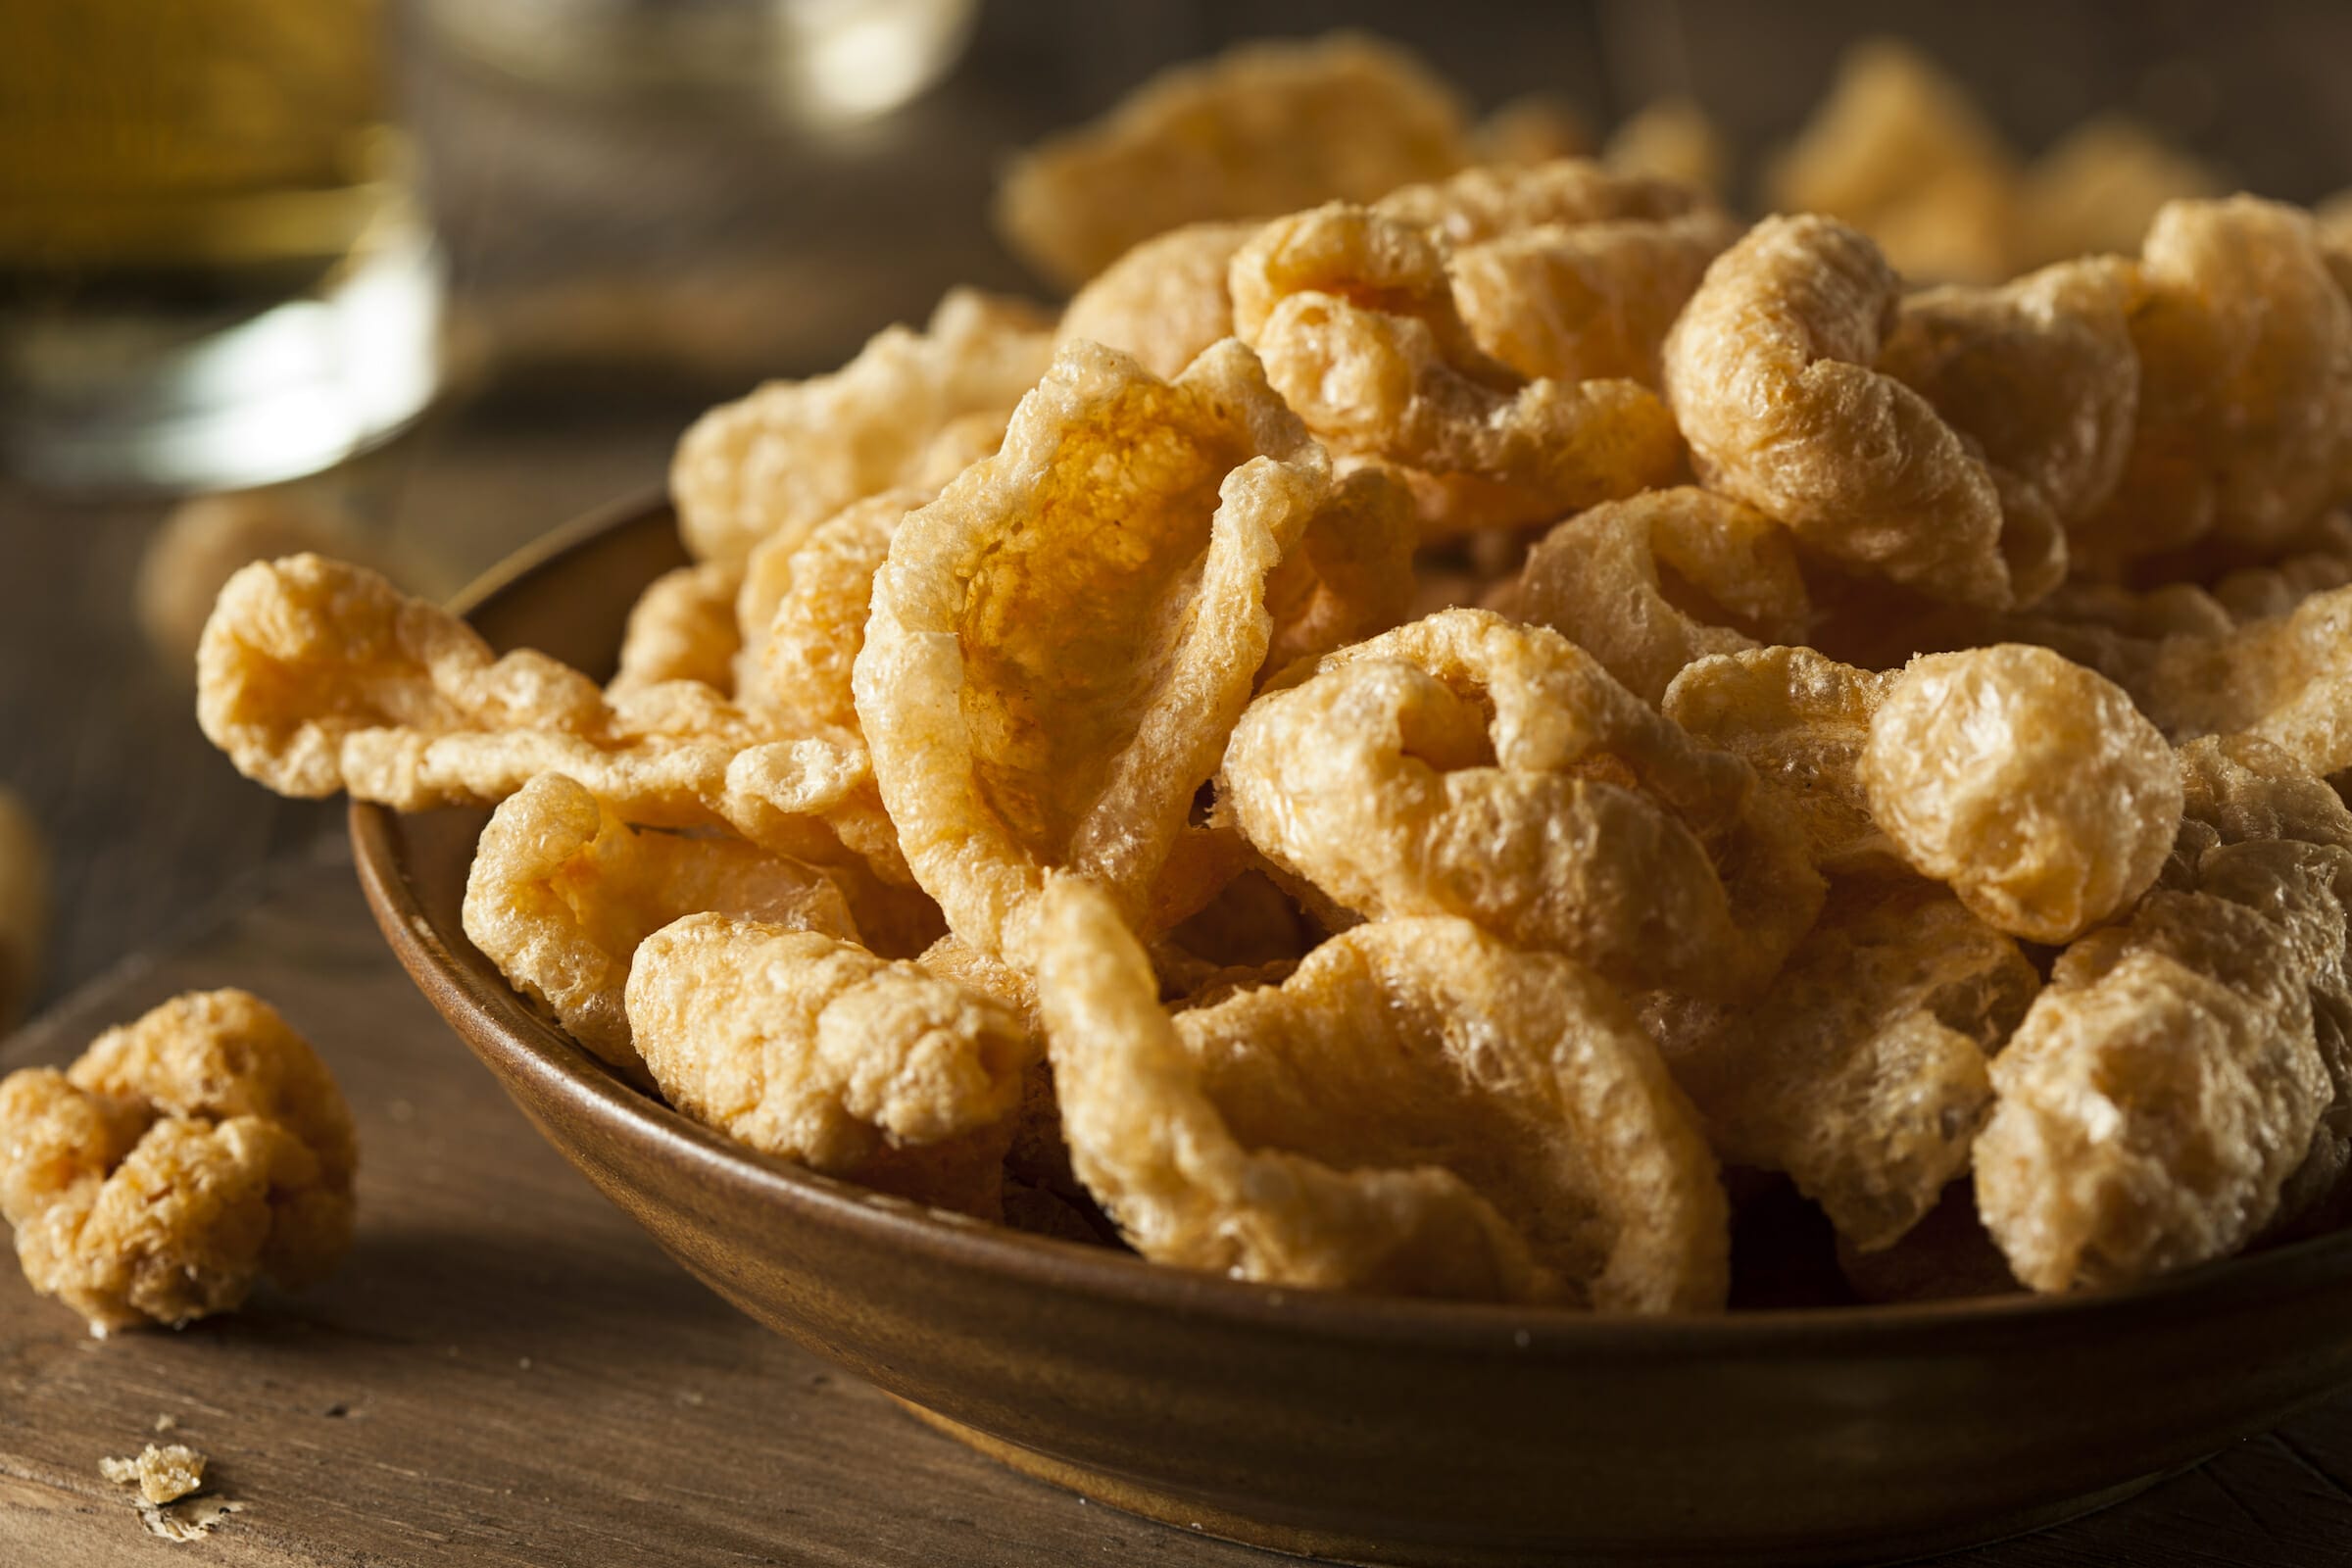 Why Fried Pork Skins (Chicharrones) Might Be The Perfect Keto Snack